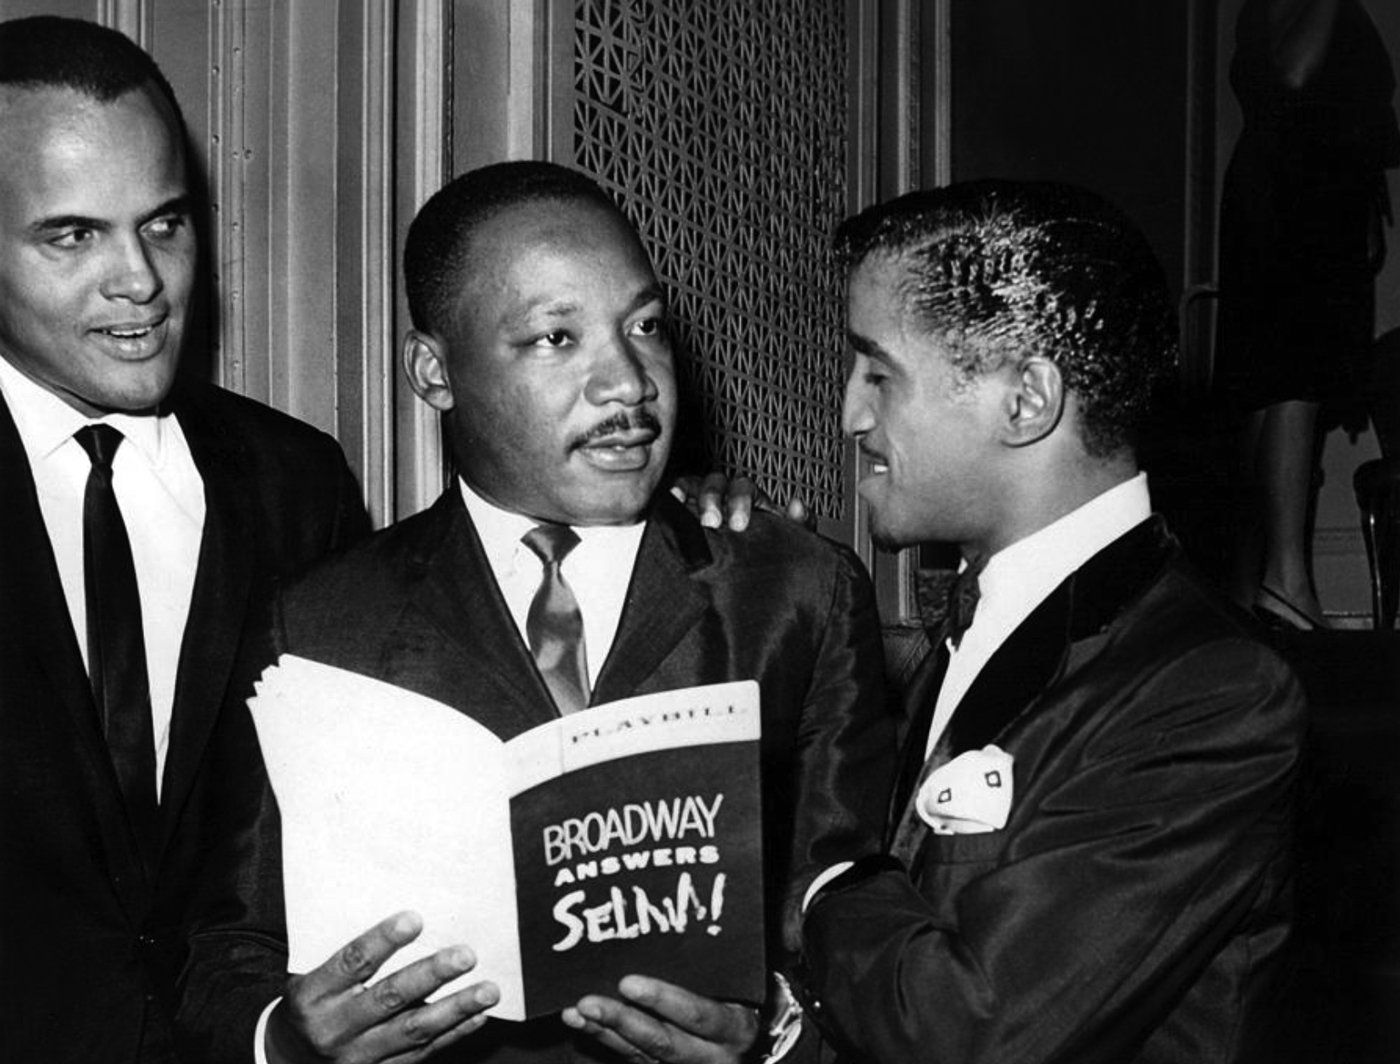 Harry Belafonte, Martin Luther King, and Sammy Davis Jr. at the show.